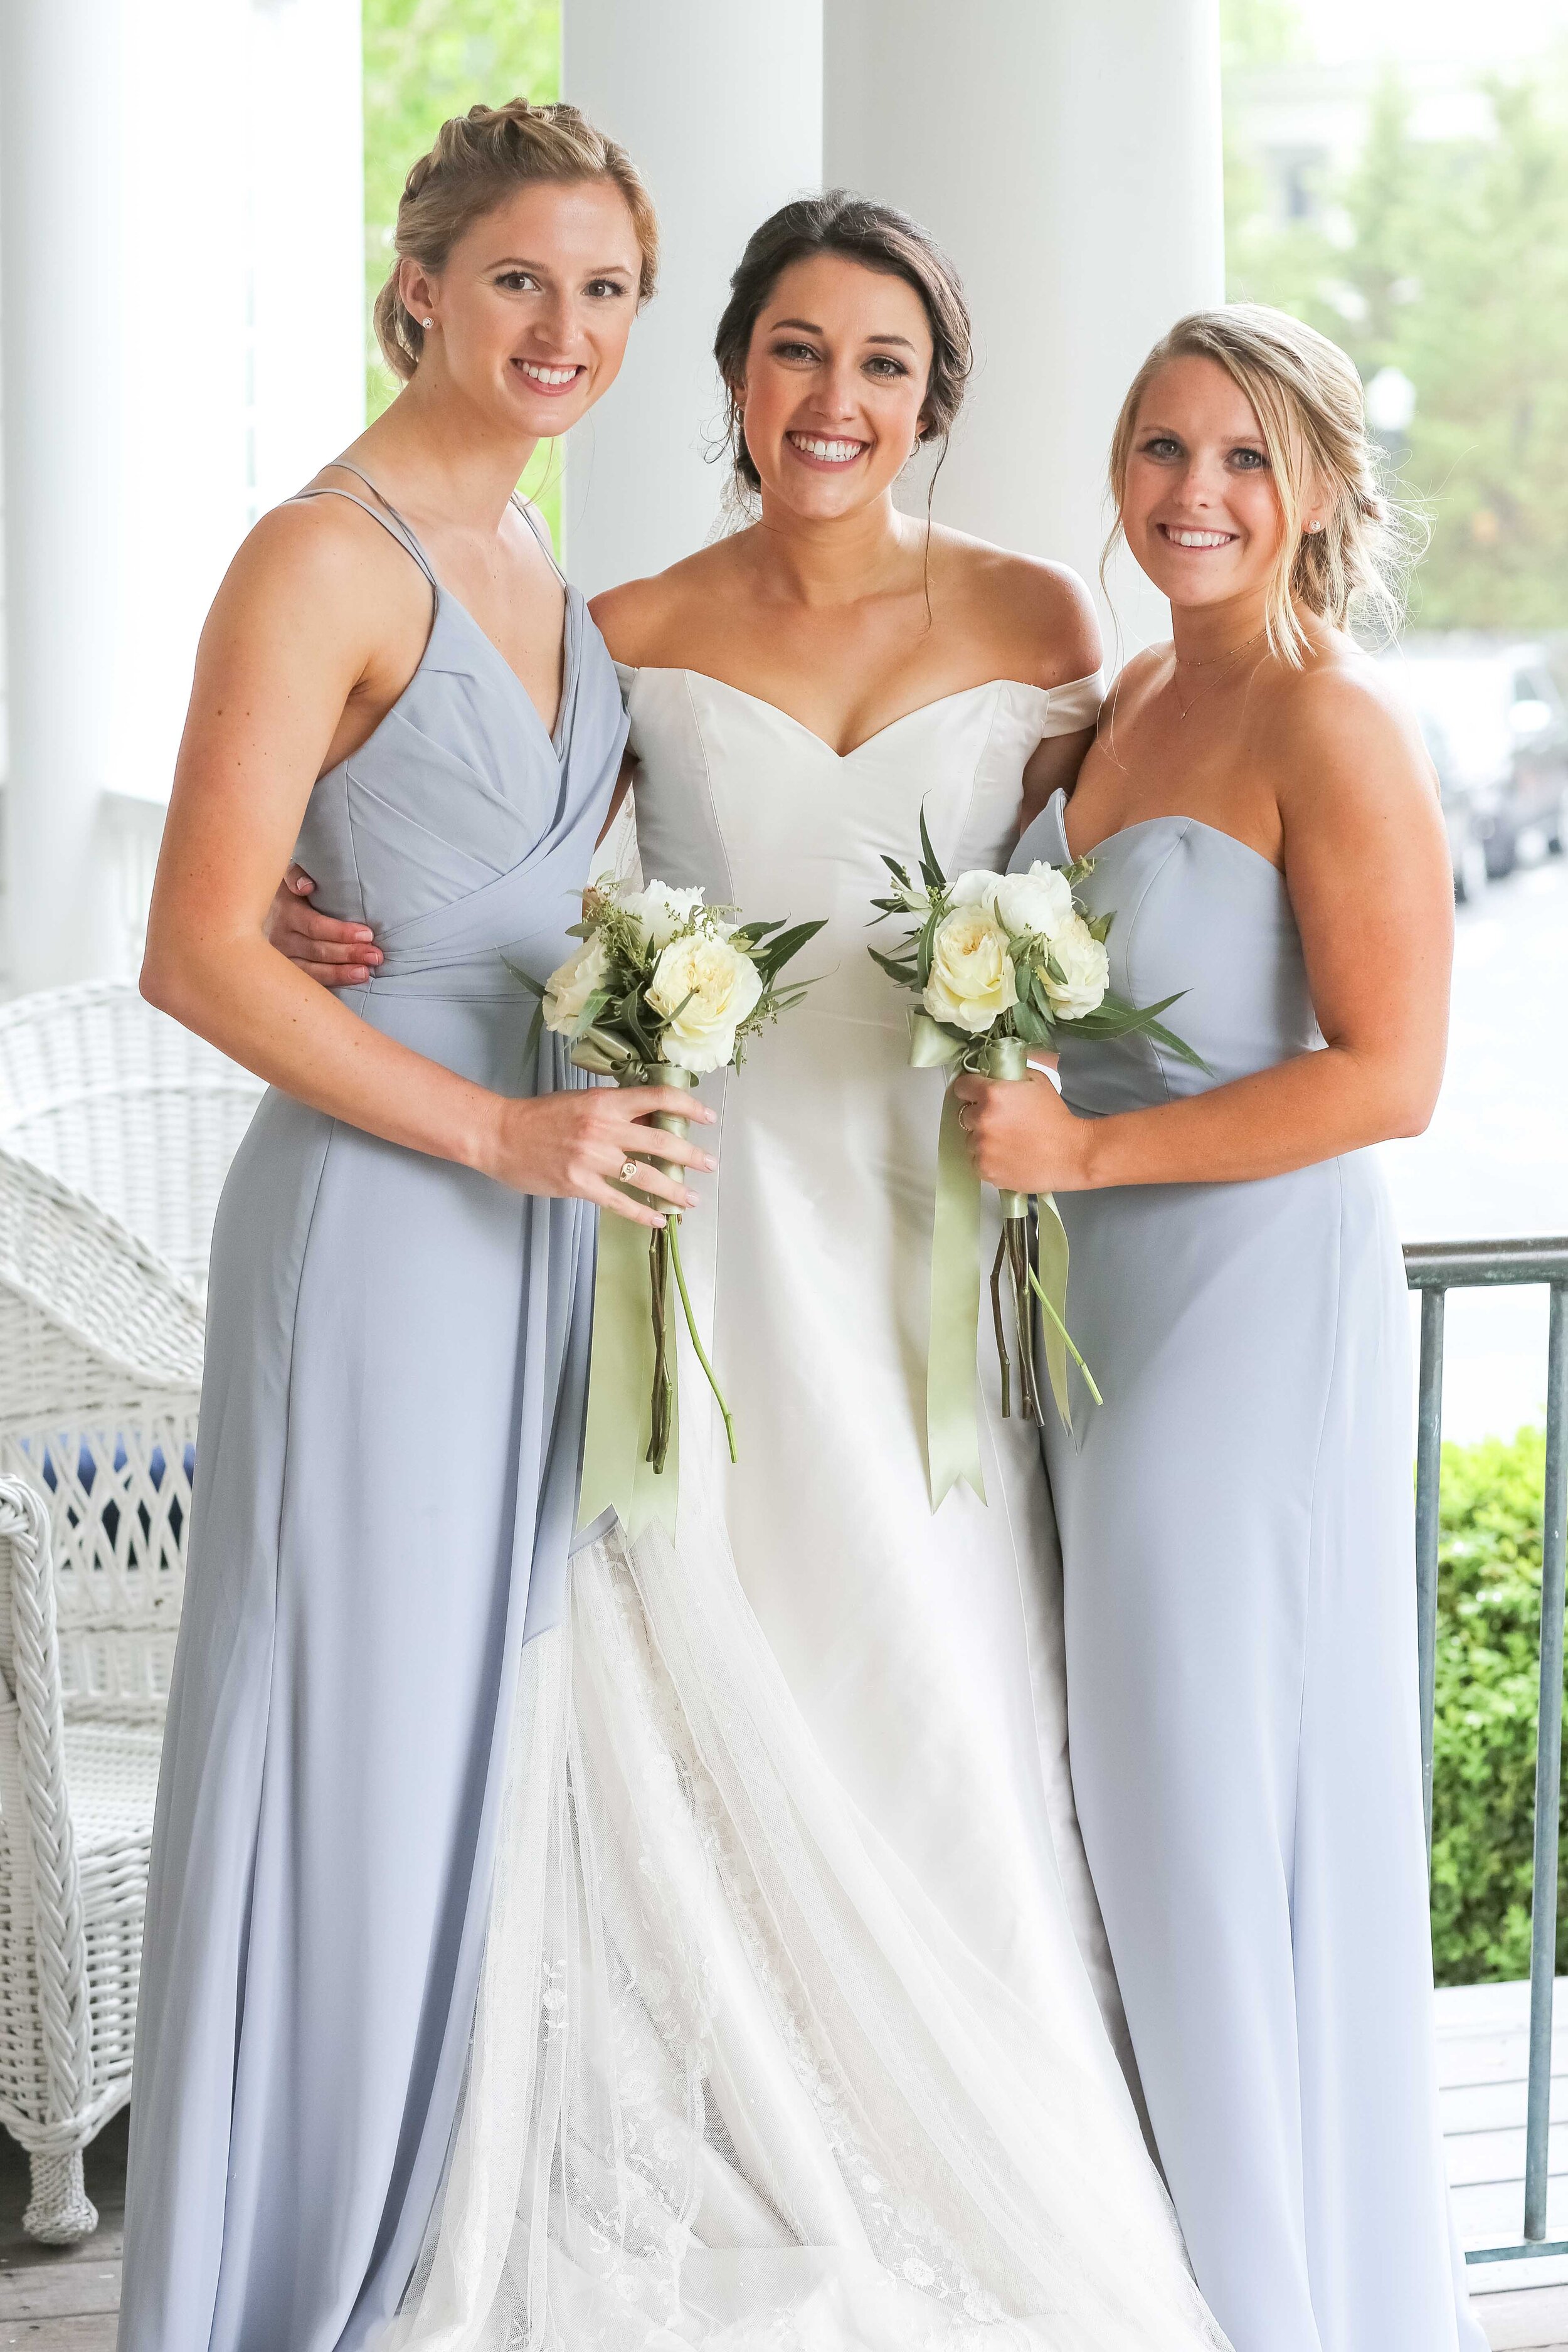 CONNECTICUT WEDDING PHOTOGRAPHER AT BELLE HAVEN CLUB IN GREENWICH 